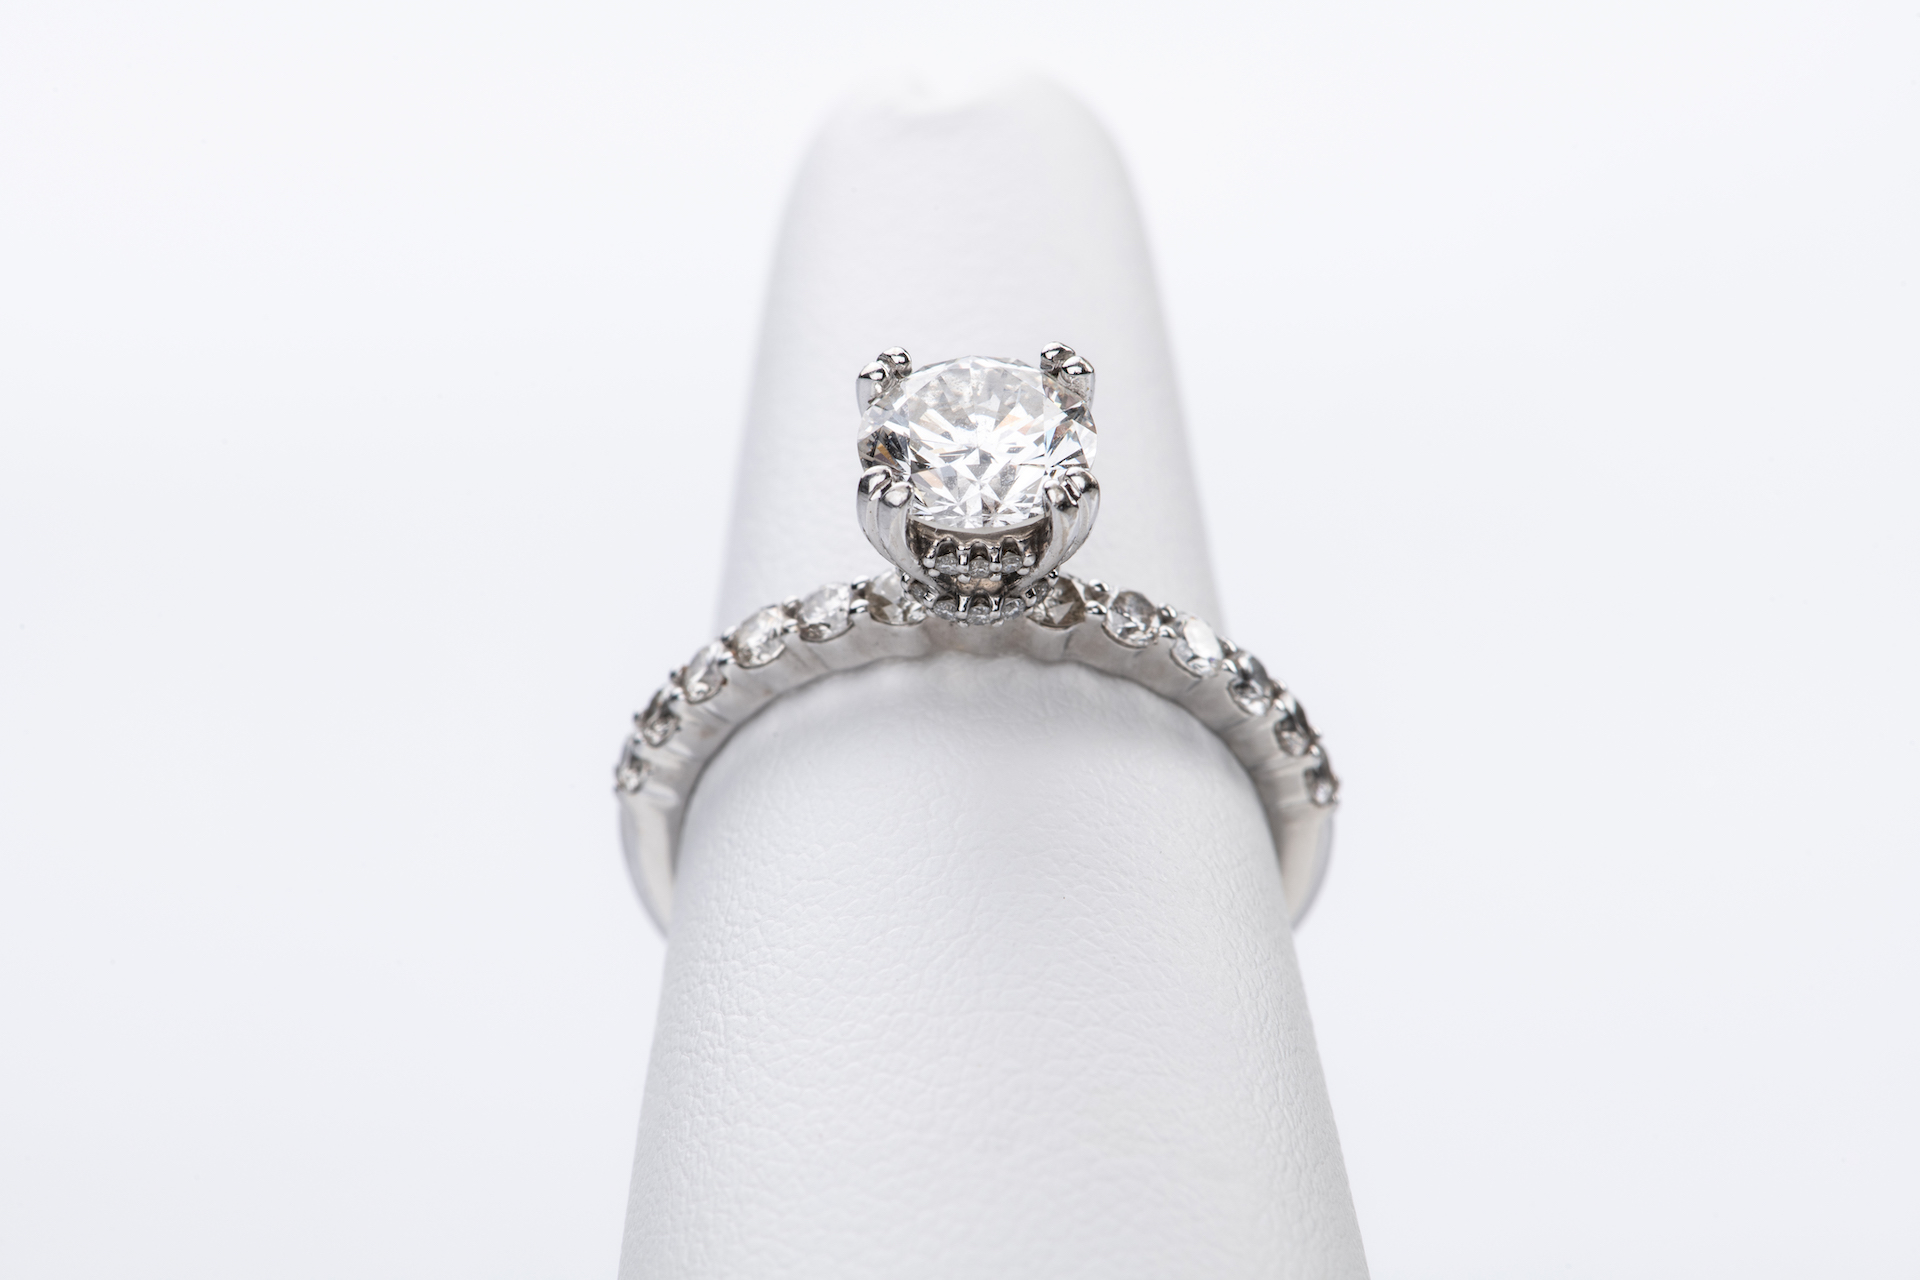 Diamond solitaire ring with a hidden halo on a pave band